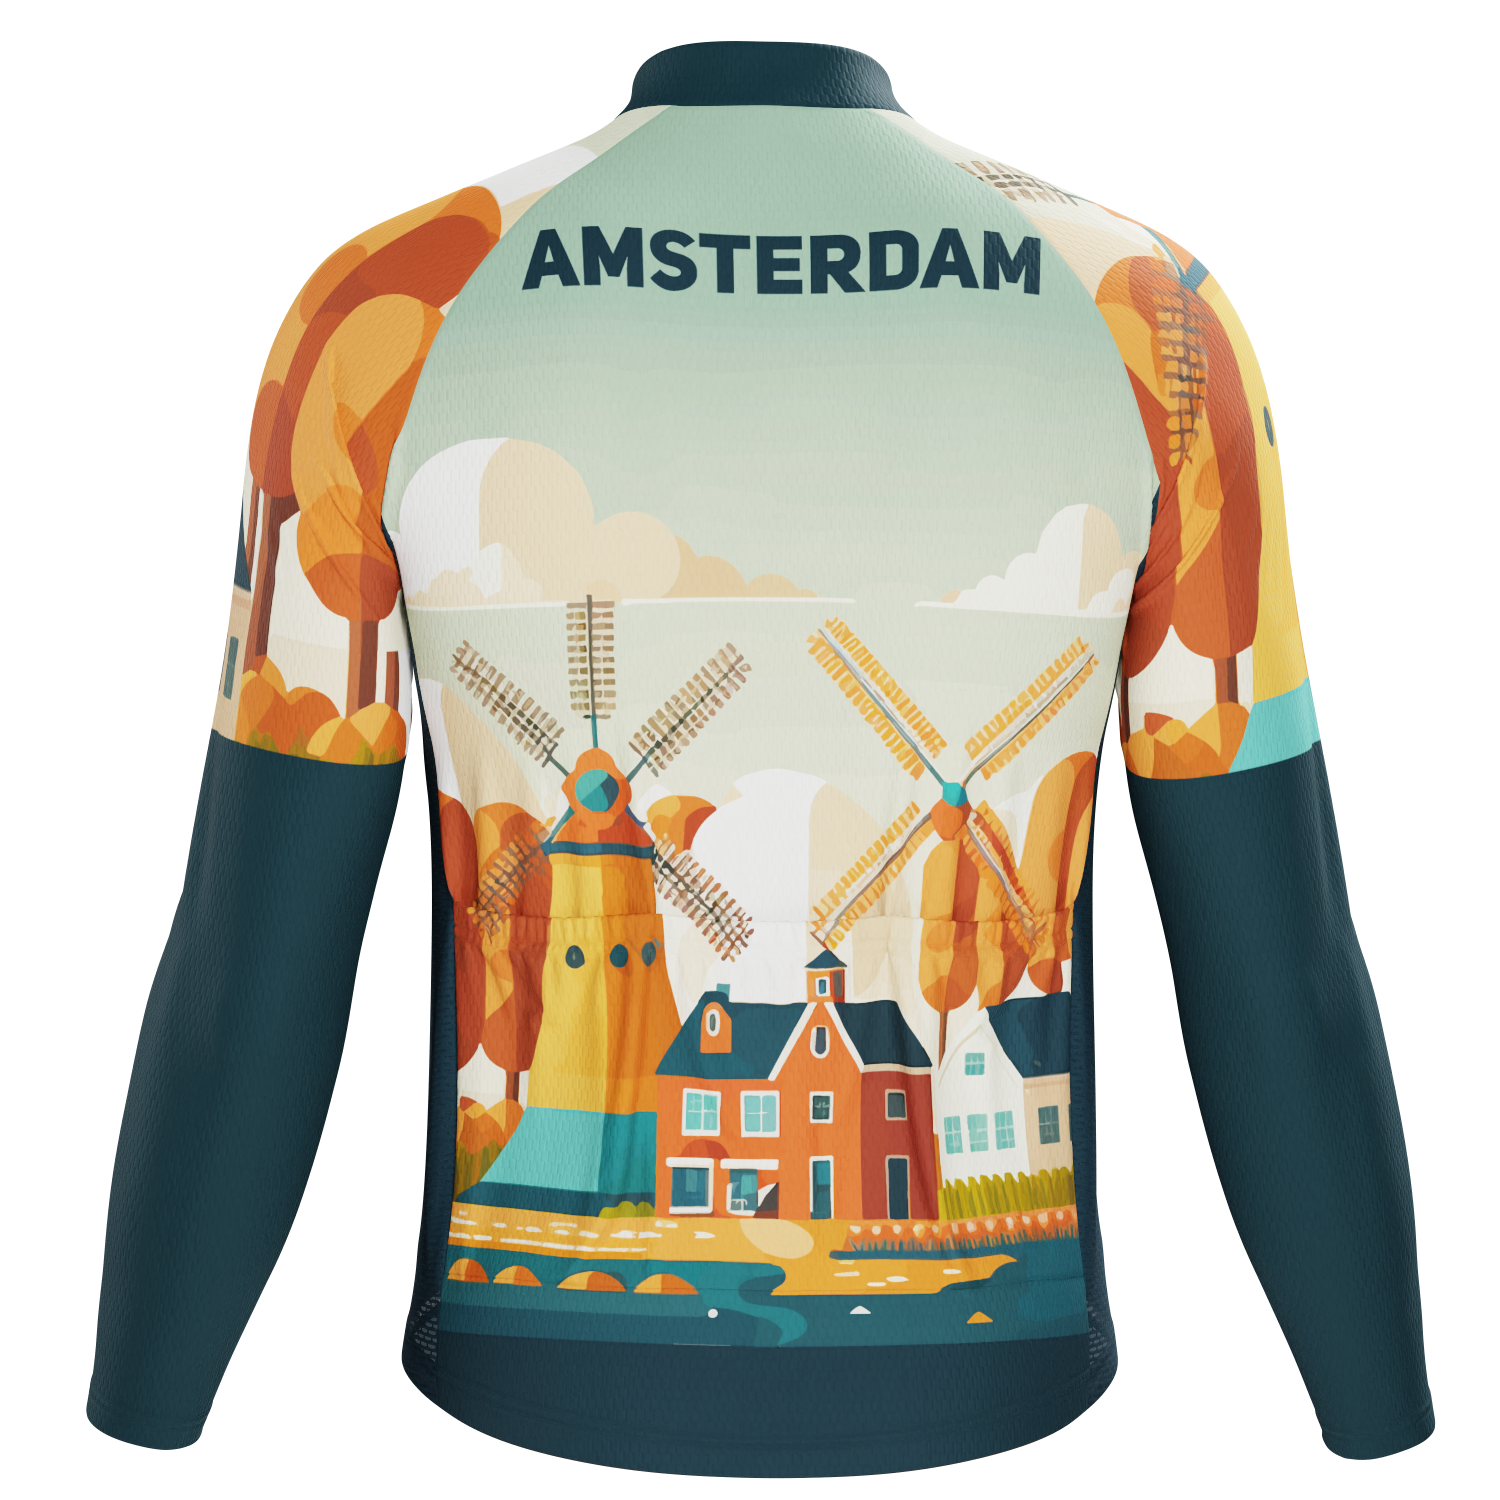 Men's Around The World - Amsterdam Long Sleeve Cycling Jersey